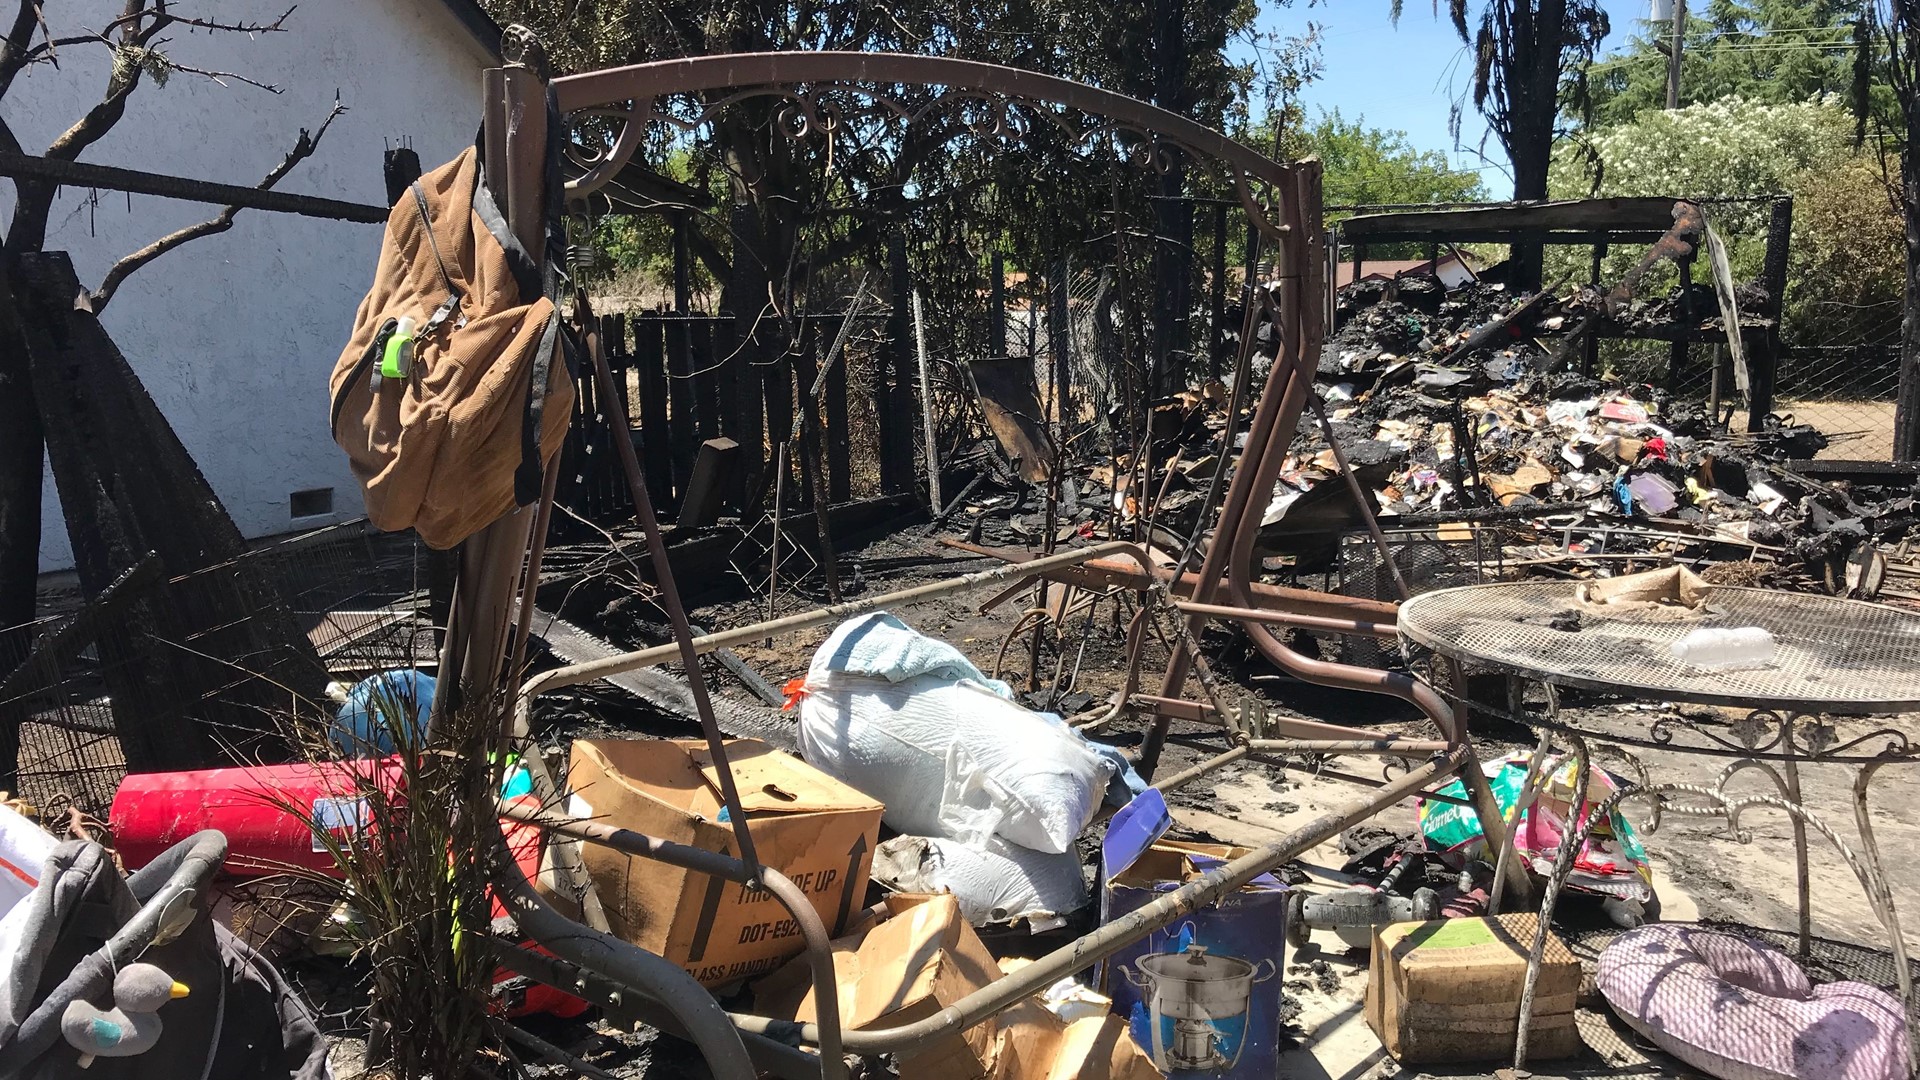 Homeowners in Tracy are still on edge after a fire tore through part of their neighborhood Sunday night. Firefighters say a grass fire jumped a canal behind homes on Cabrillo Drive and rushed through the neighborhood just after 4:30 p.m. Eleven structures were damaged, but only one home was a total loss.